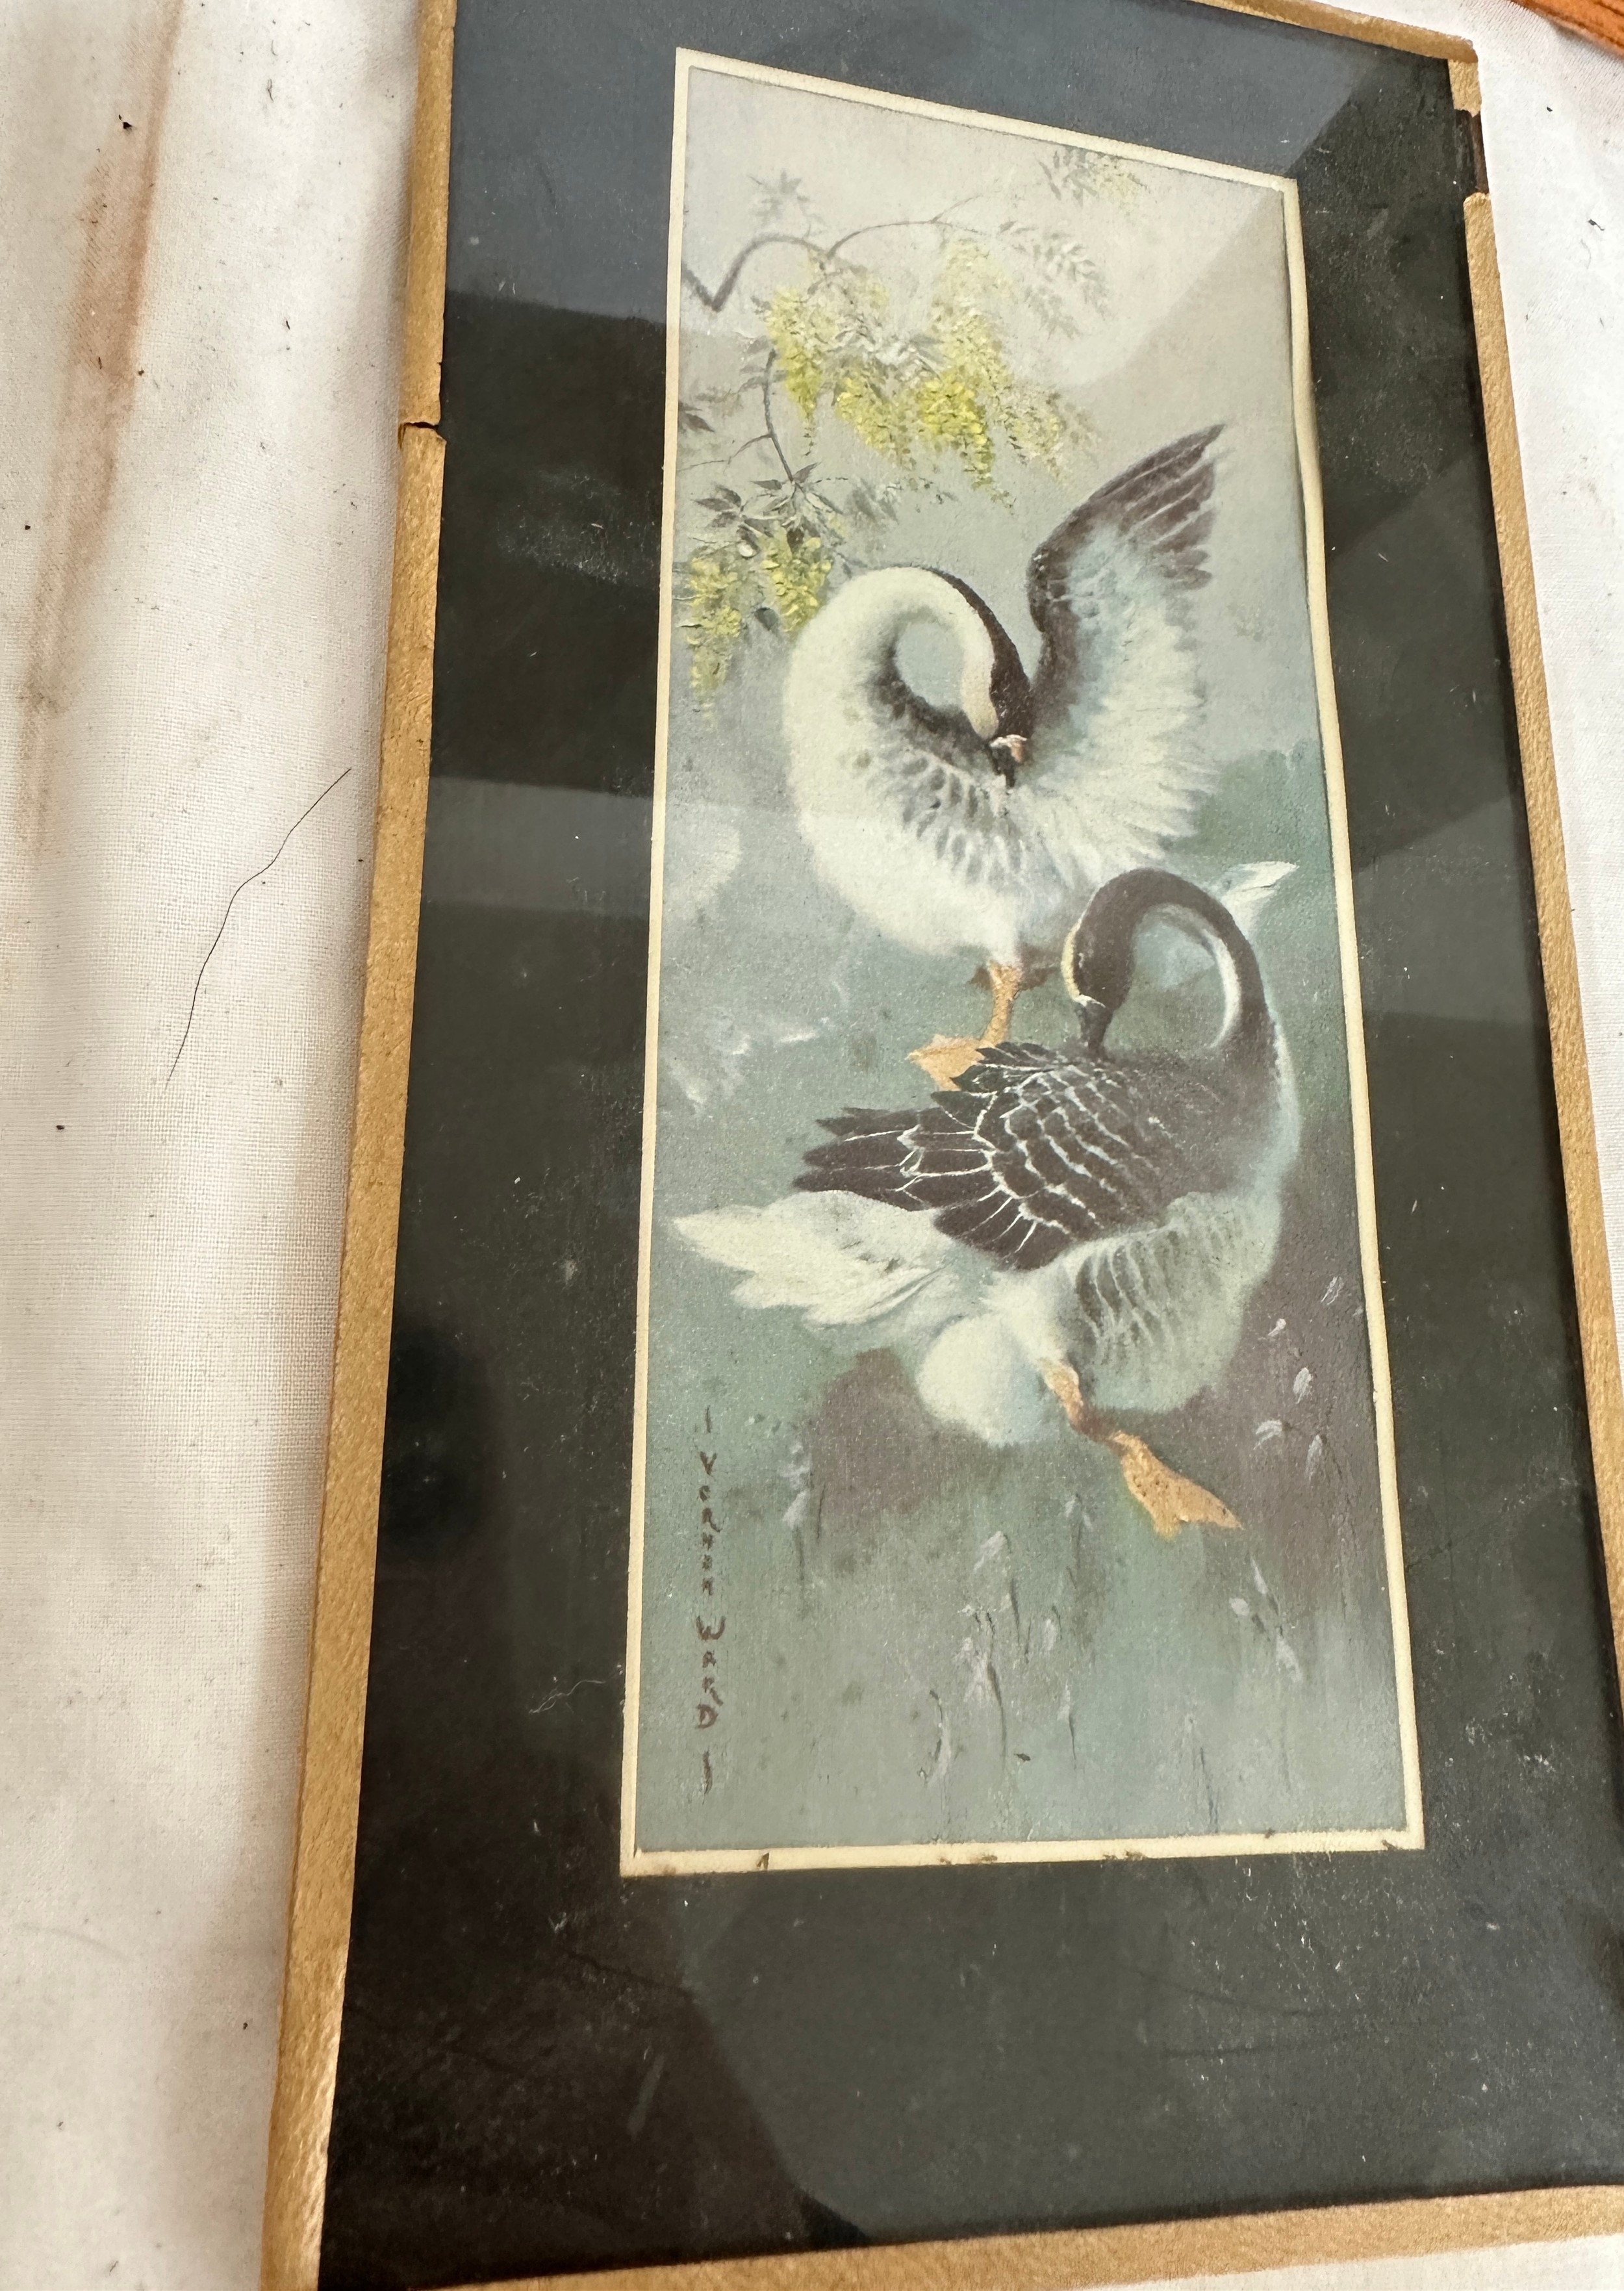 Framed prints by Shirley Carnt, Signed watercolour by Melvyn R J Brinkley, Watercolour by John - Image 8 of 8